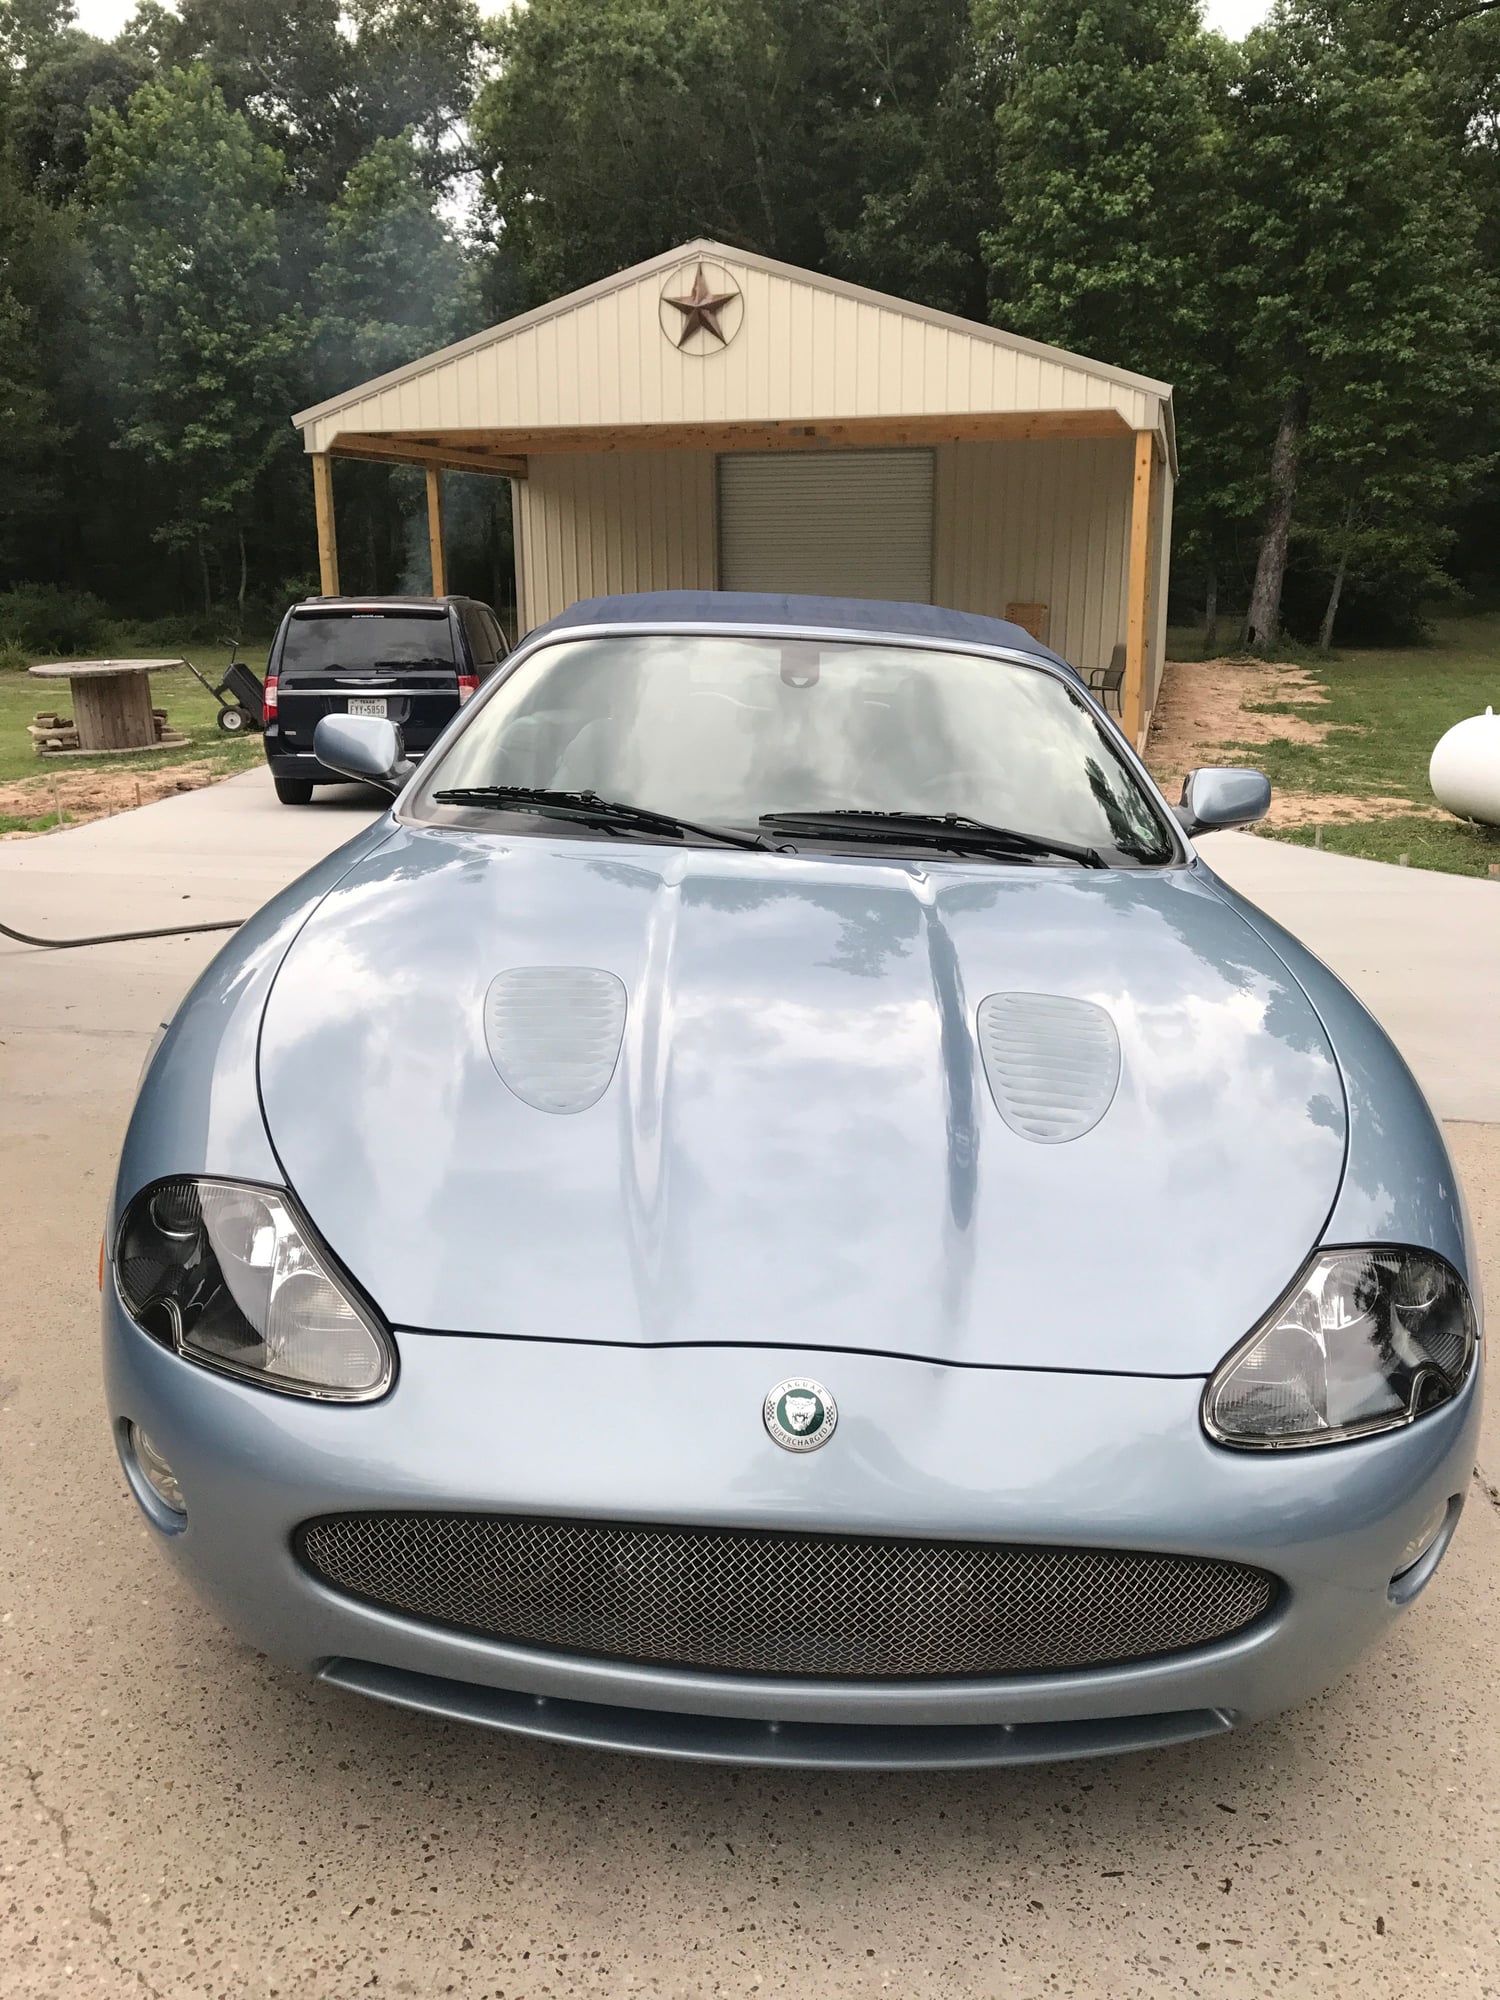 2006 Jaguar XKR - 2006 Jaguar XKR - Victory Edition - Used - VIN SAJDA42B063A44803 - 96,000 Miles - 8 cyl - 2WD - Automatic - Convertible - Blue - Huffman, TX 77336, United States